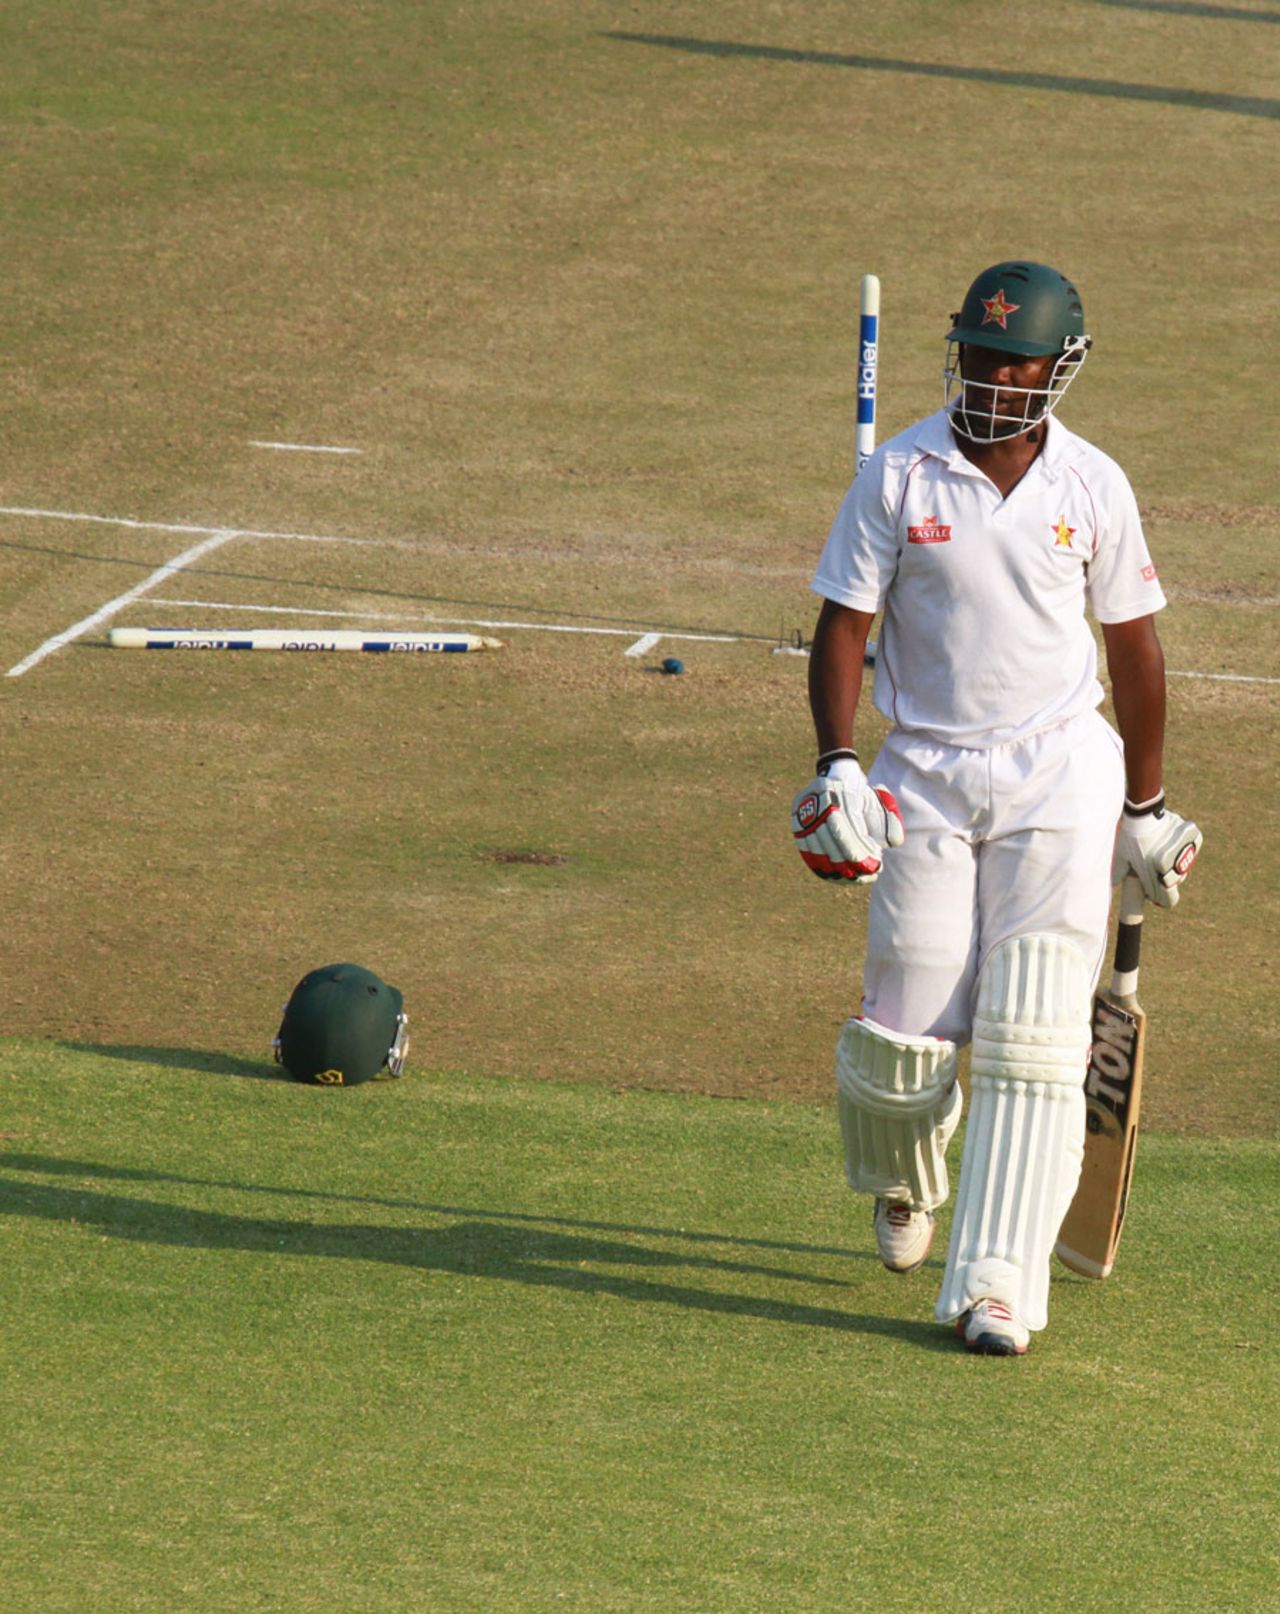 Elton Chigumbura walks back after being bowled by Abdur Rehman, 2nd Test, Harare, 1st day, September 10, 2013